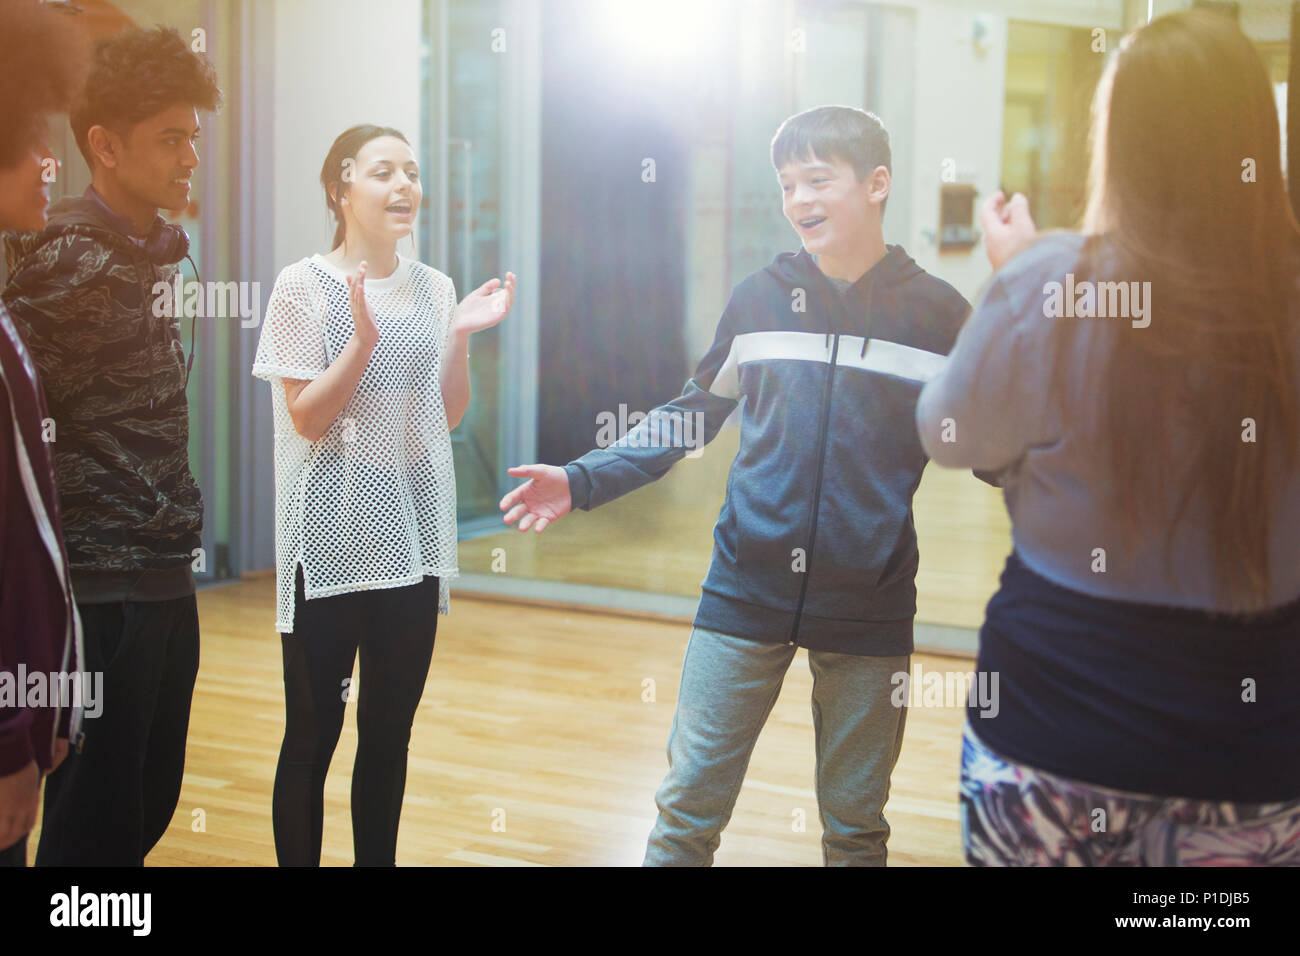 Classmates clapping for teenage boy in dance class studio Stock Photo